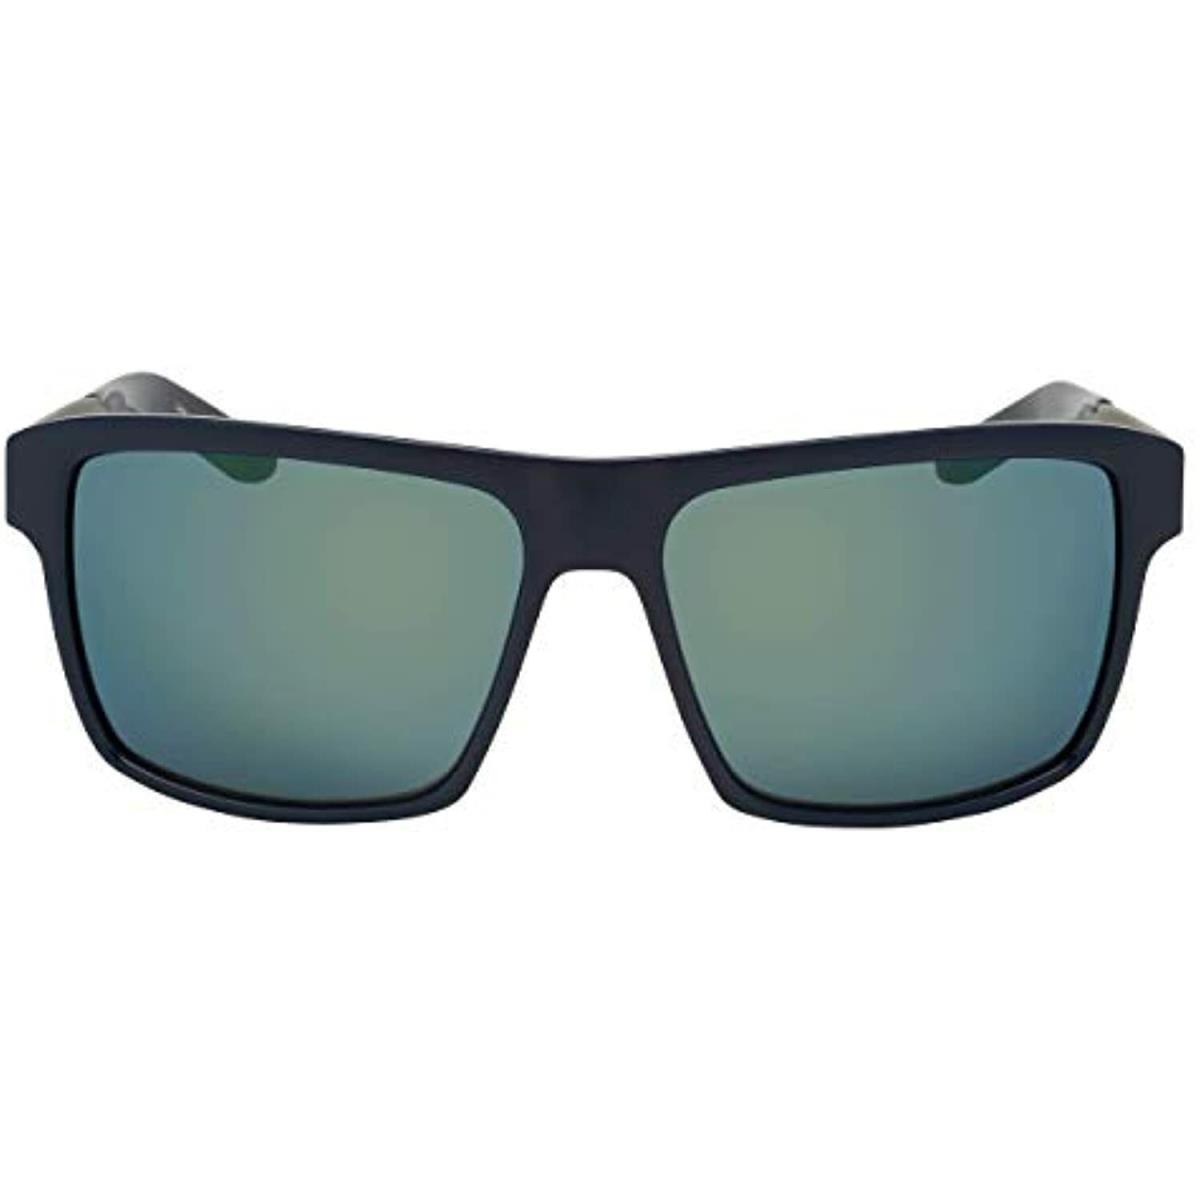 Dragon DR Space LL 410 Navy Sunglasses with Smoke Petrol Ion Luma Lenses - Navy/Ll Smoke Petrol Ion, Frame: Blue, Lens: Gray